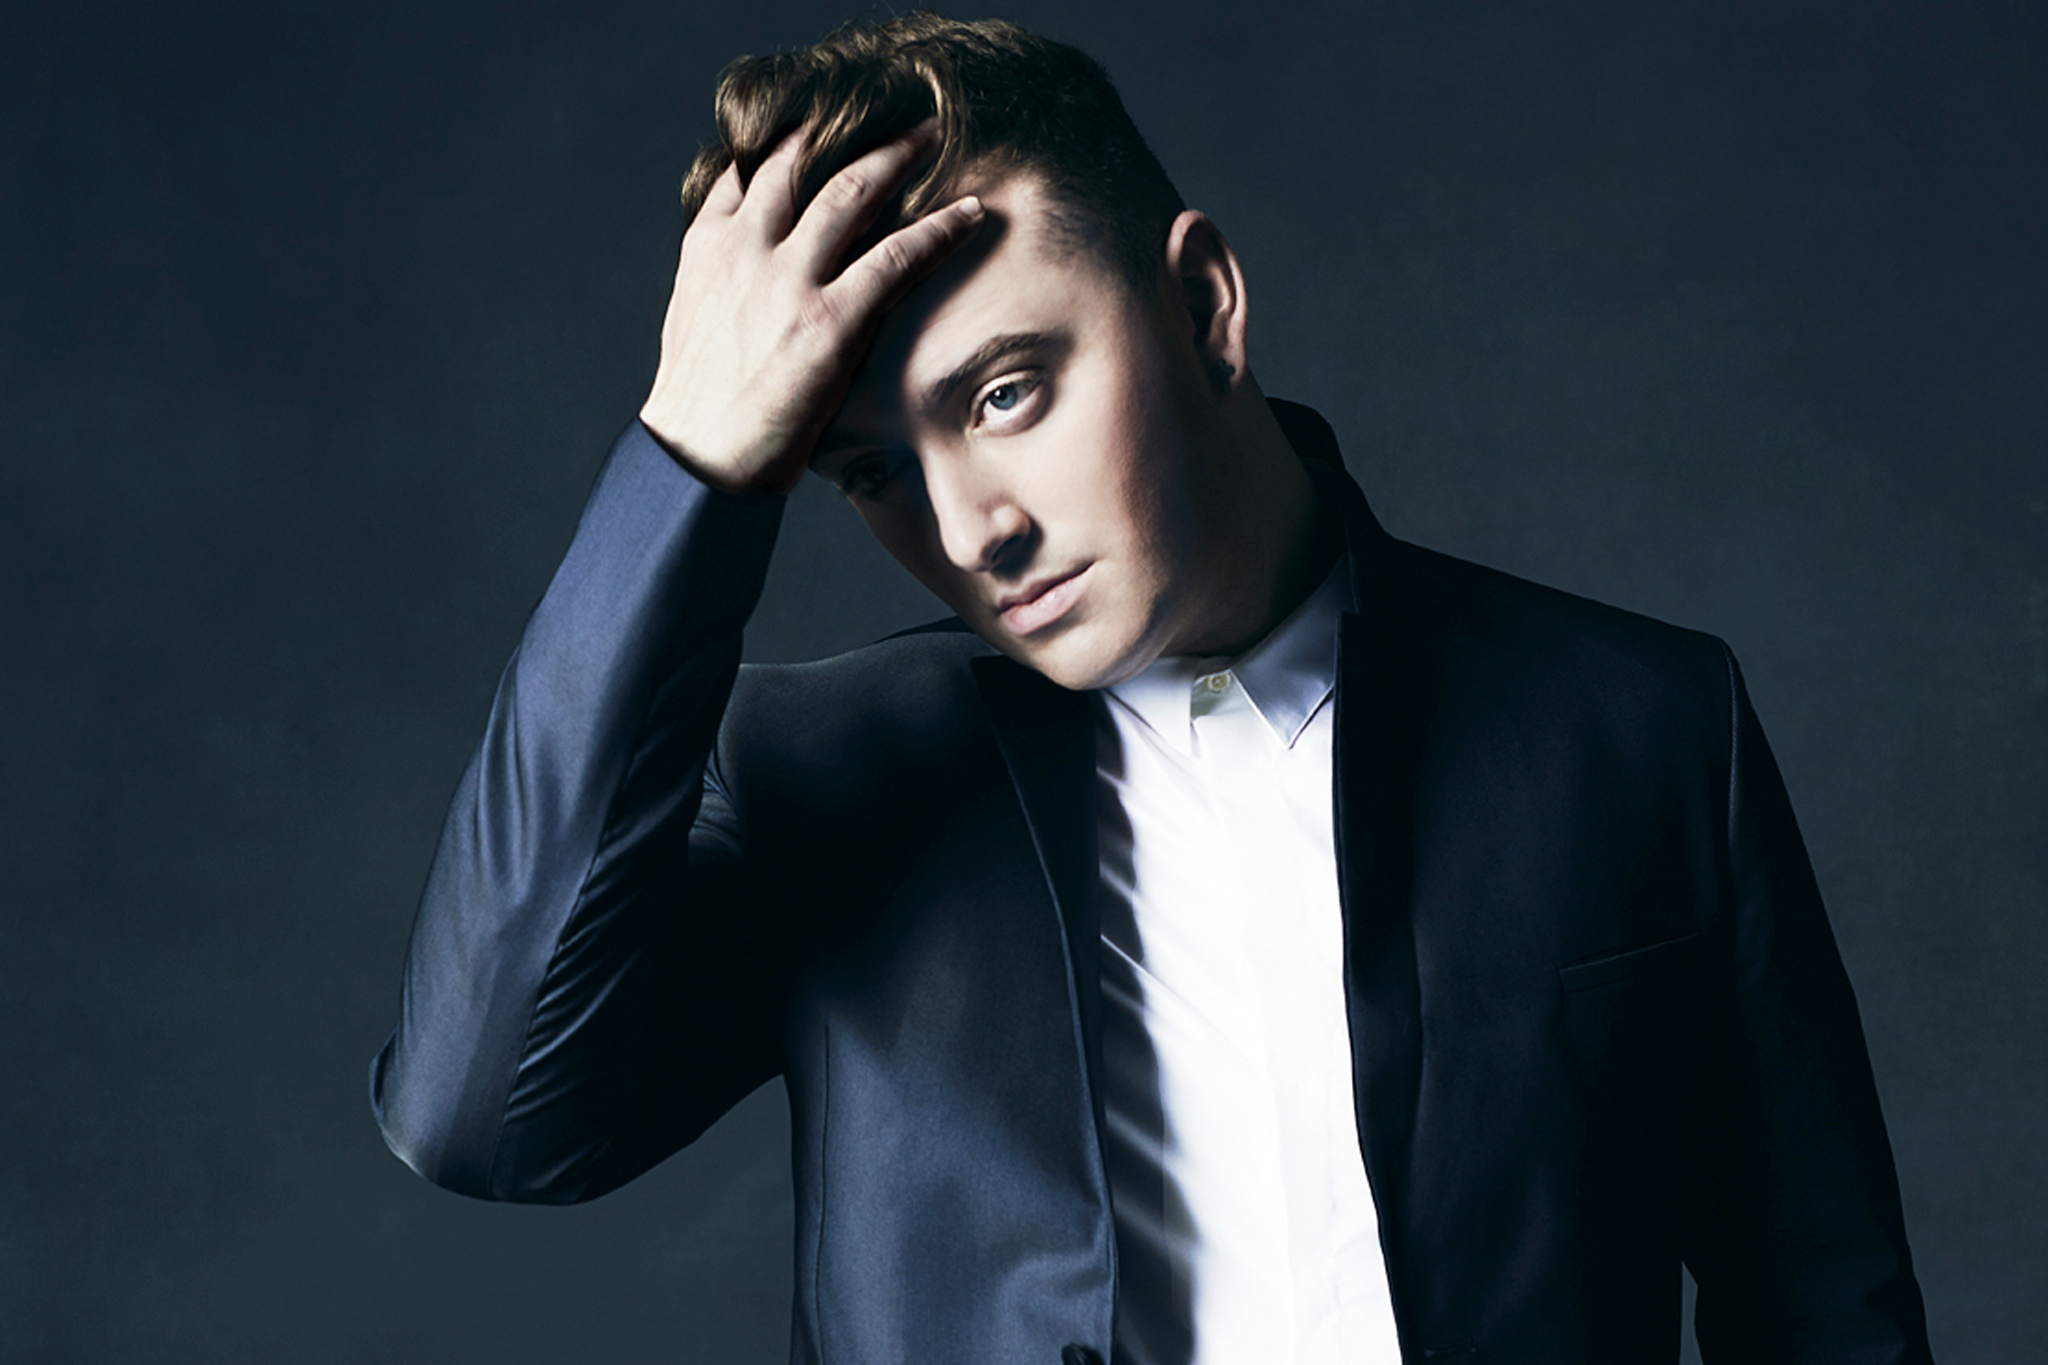 sam smith in the lonely hour review